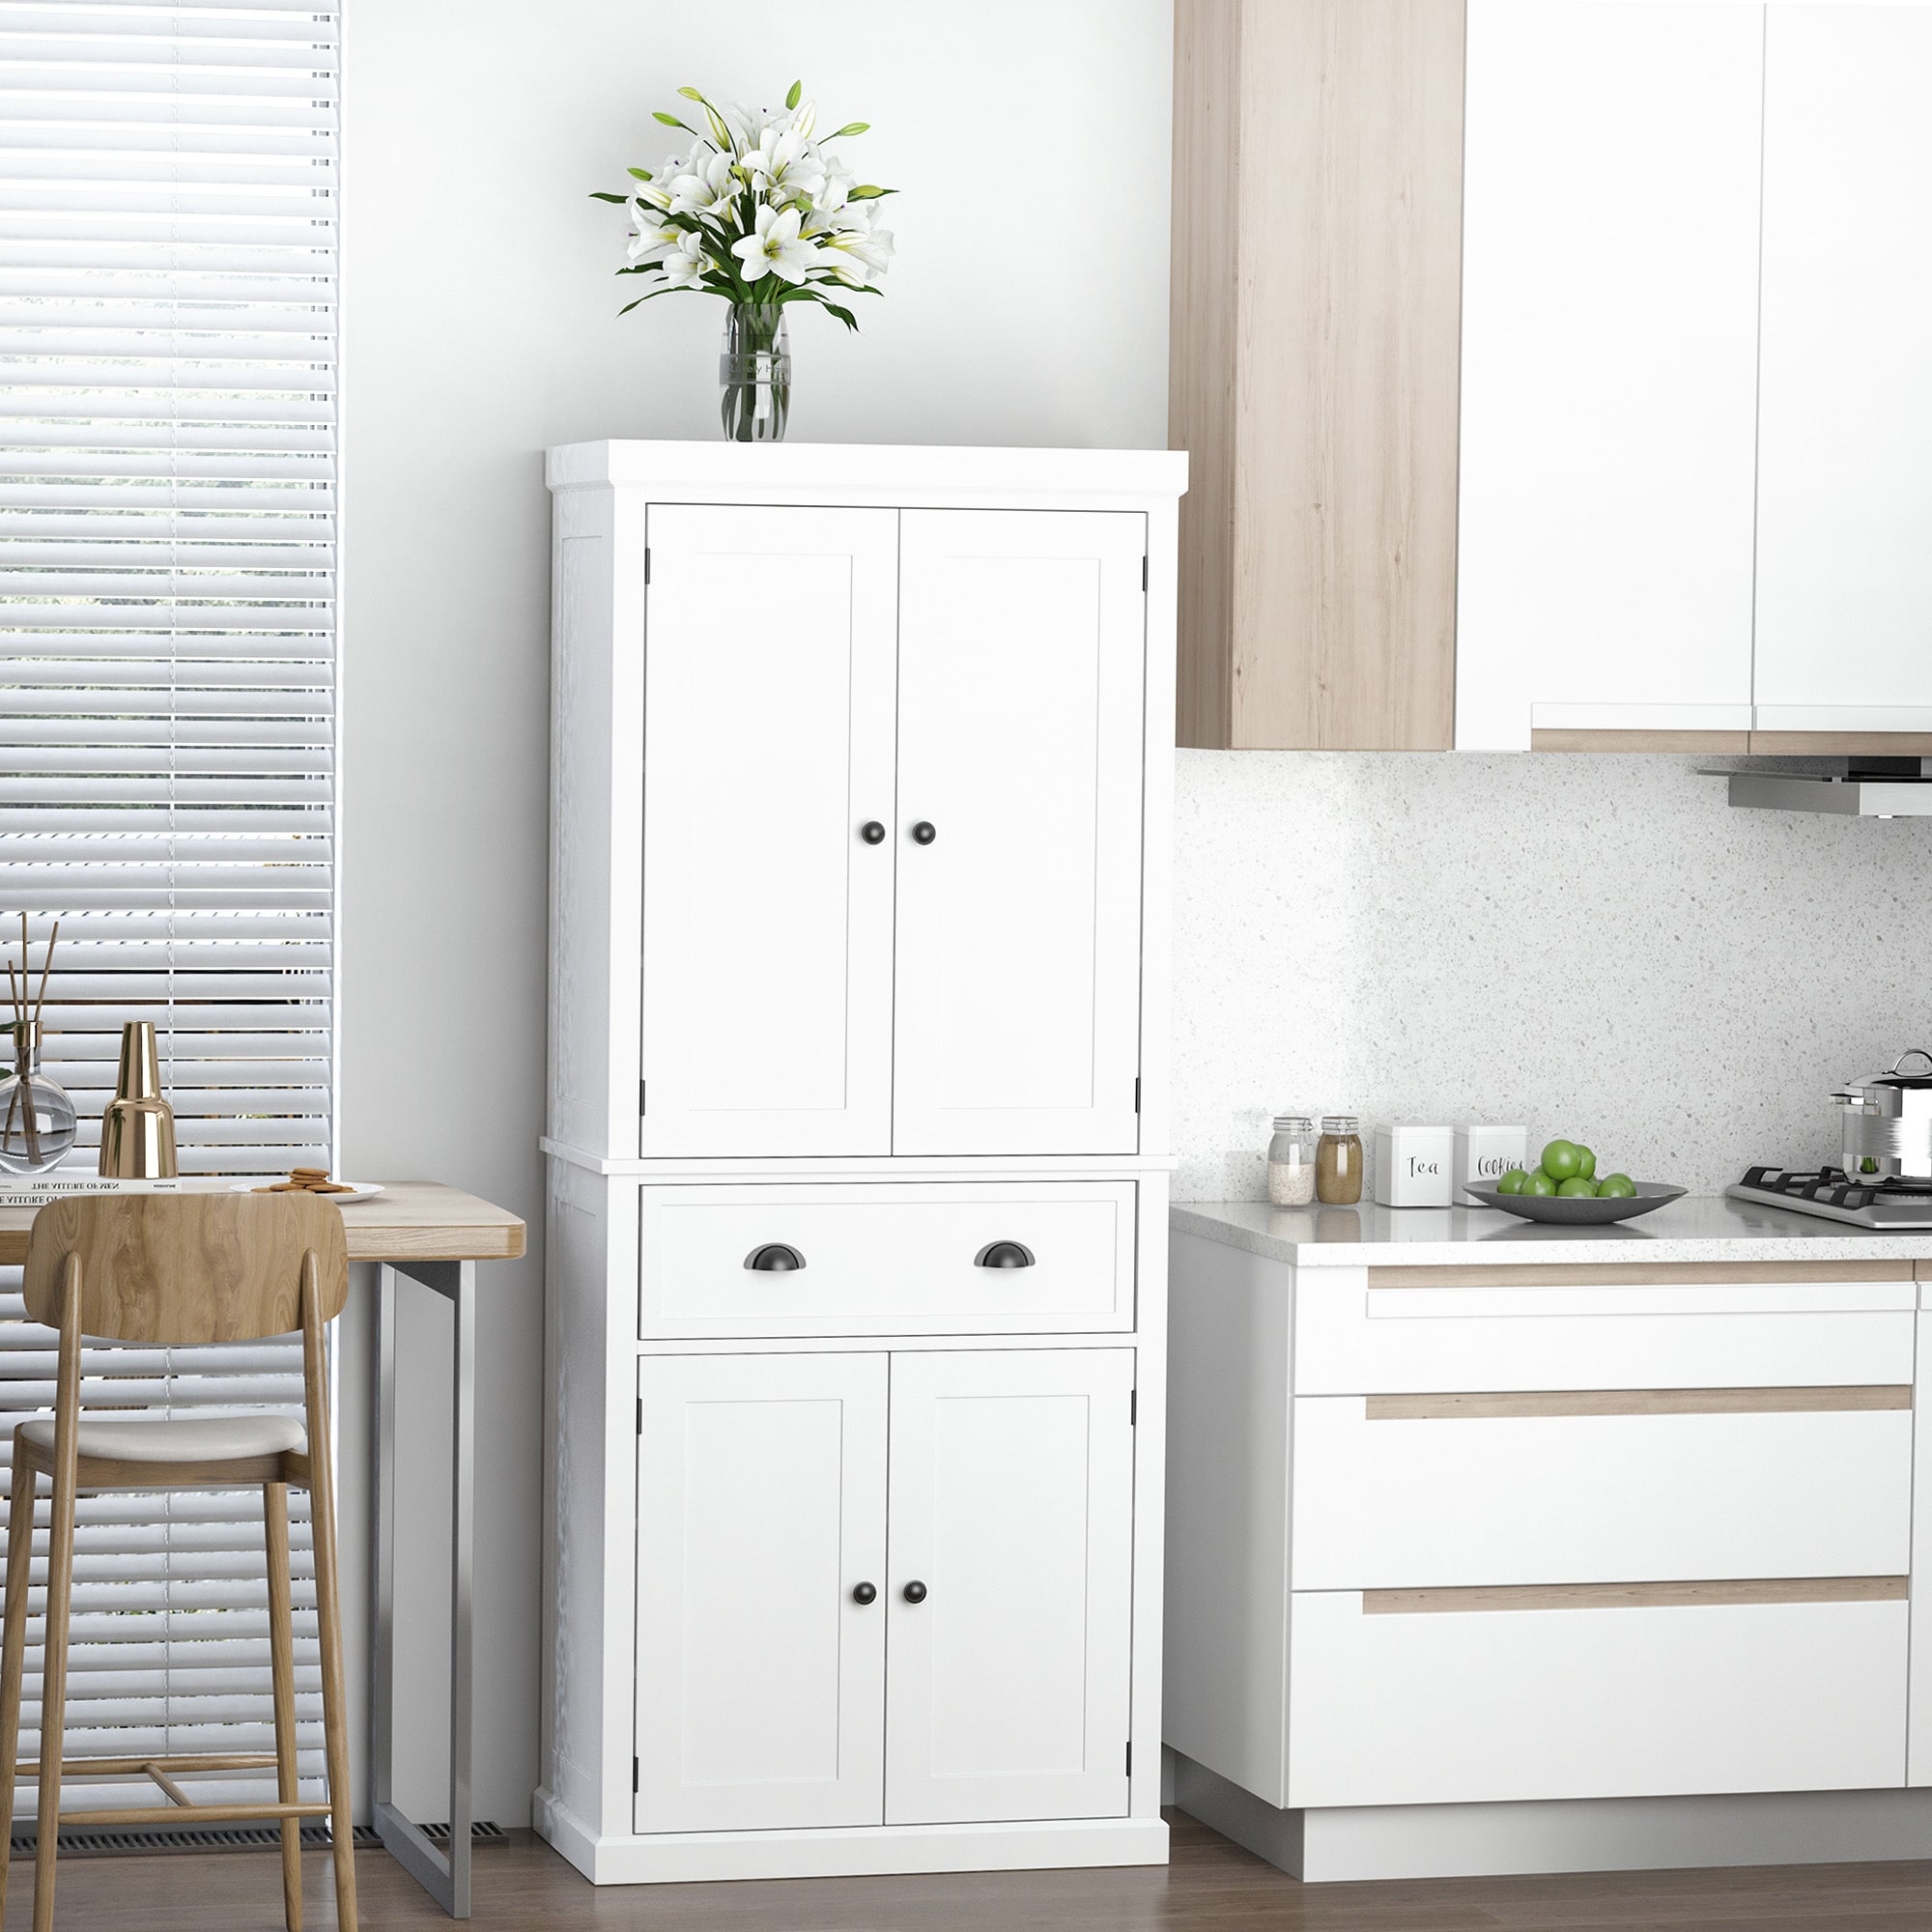  The Fridge Stand Supreme - Drawer Organization - White Frame  with Black Drawers : Home & Kitchen